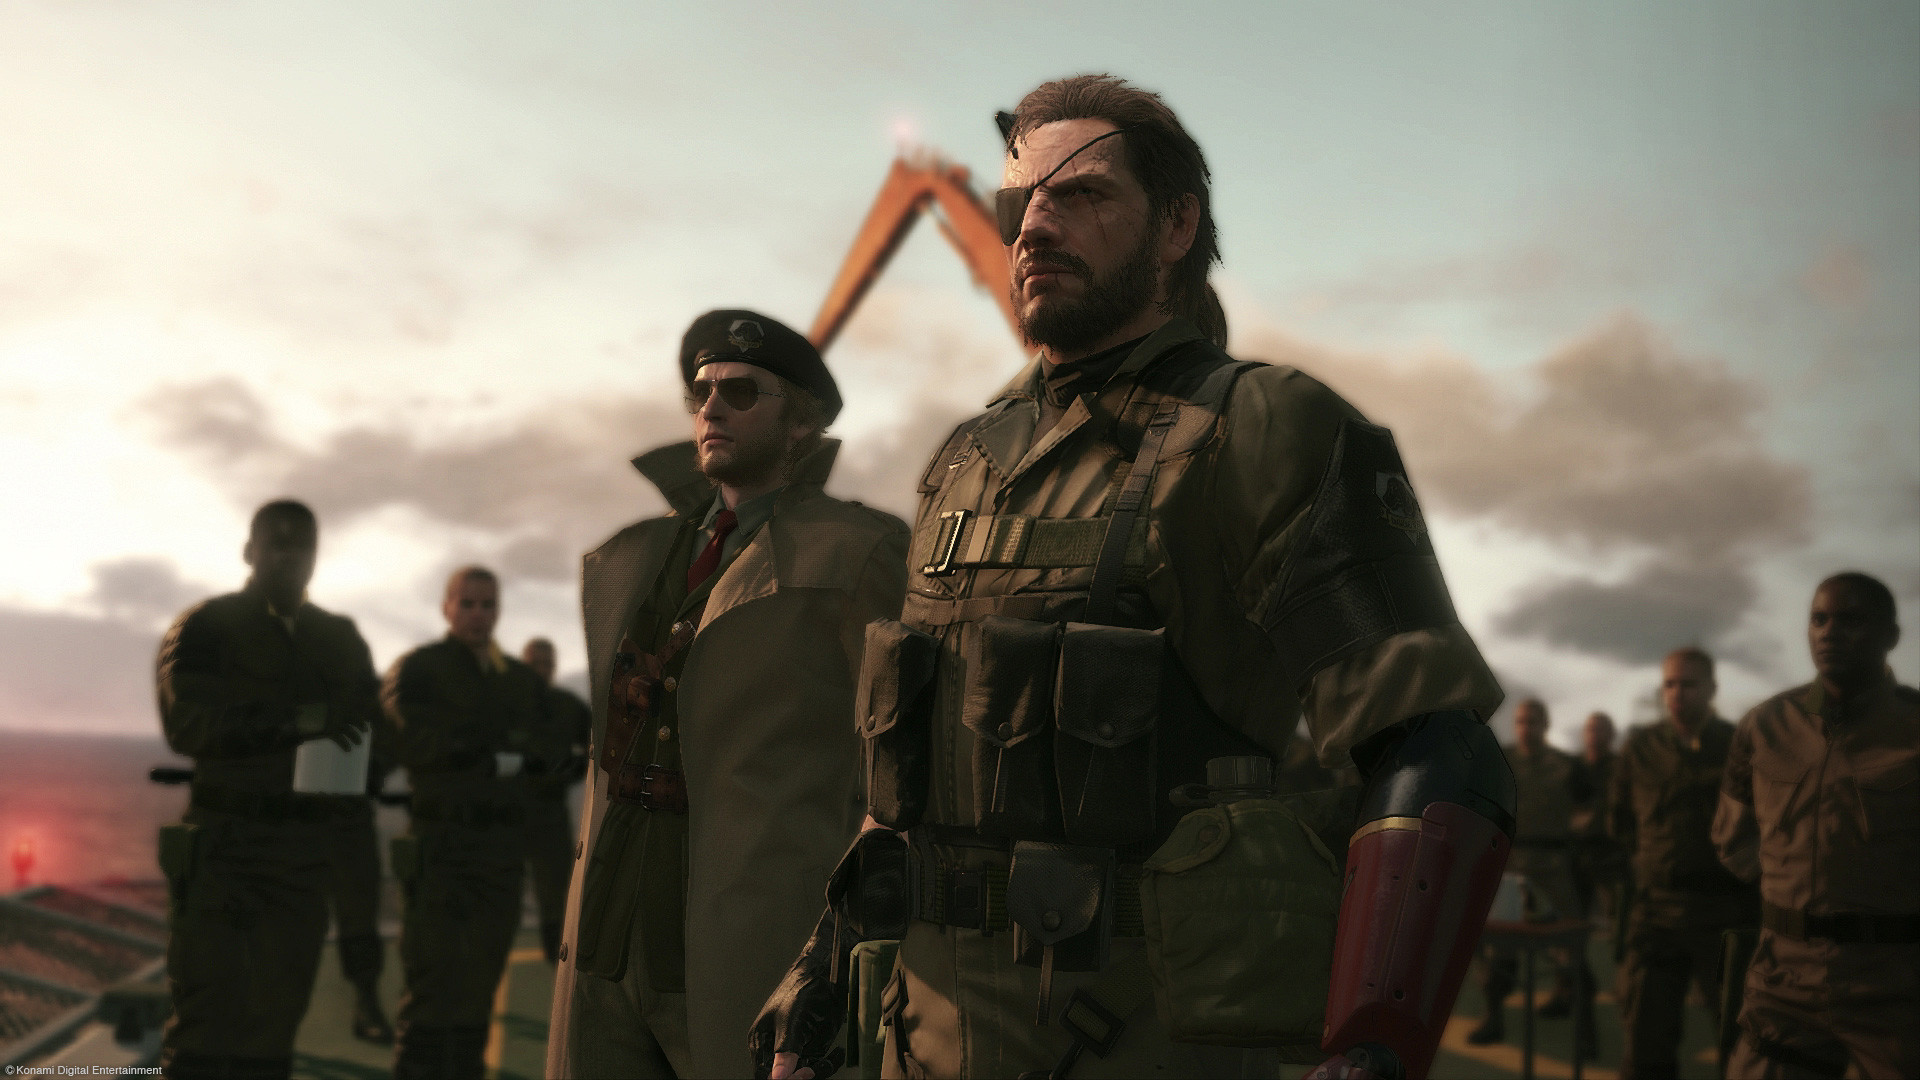 Nice Images Collection: Metal Gear Solid V: The Phantom Pain Desktop Wallpapers